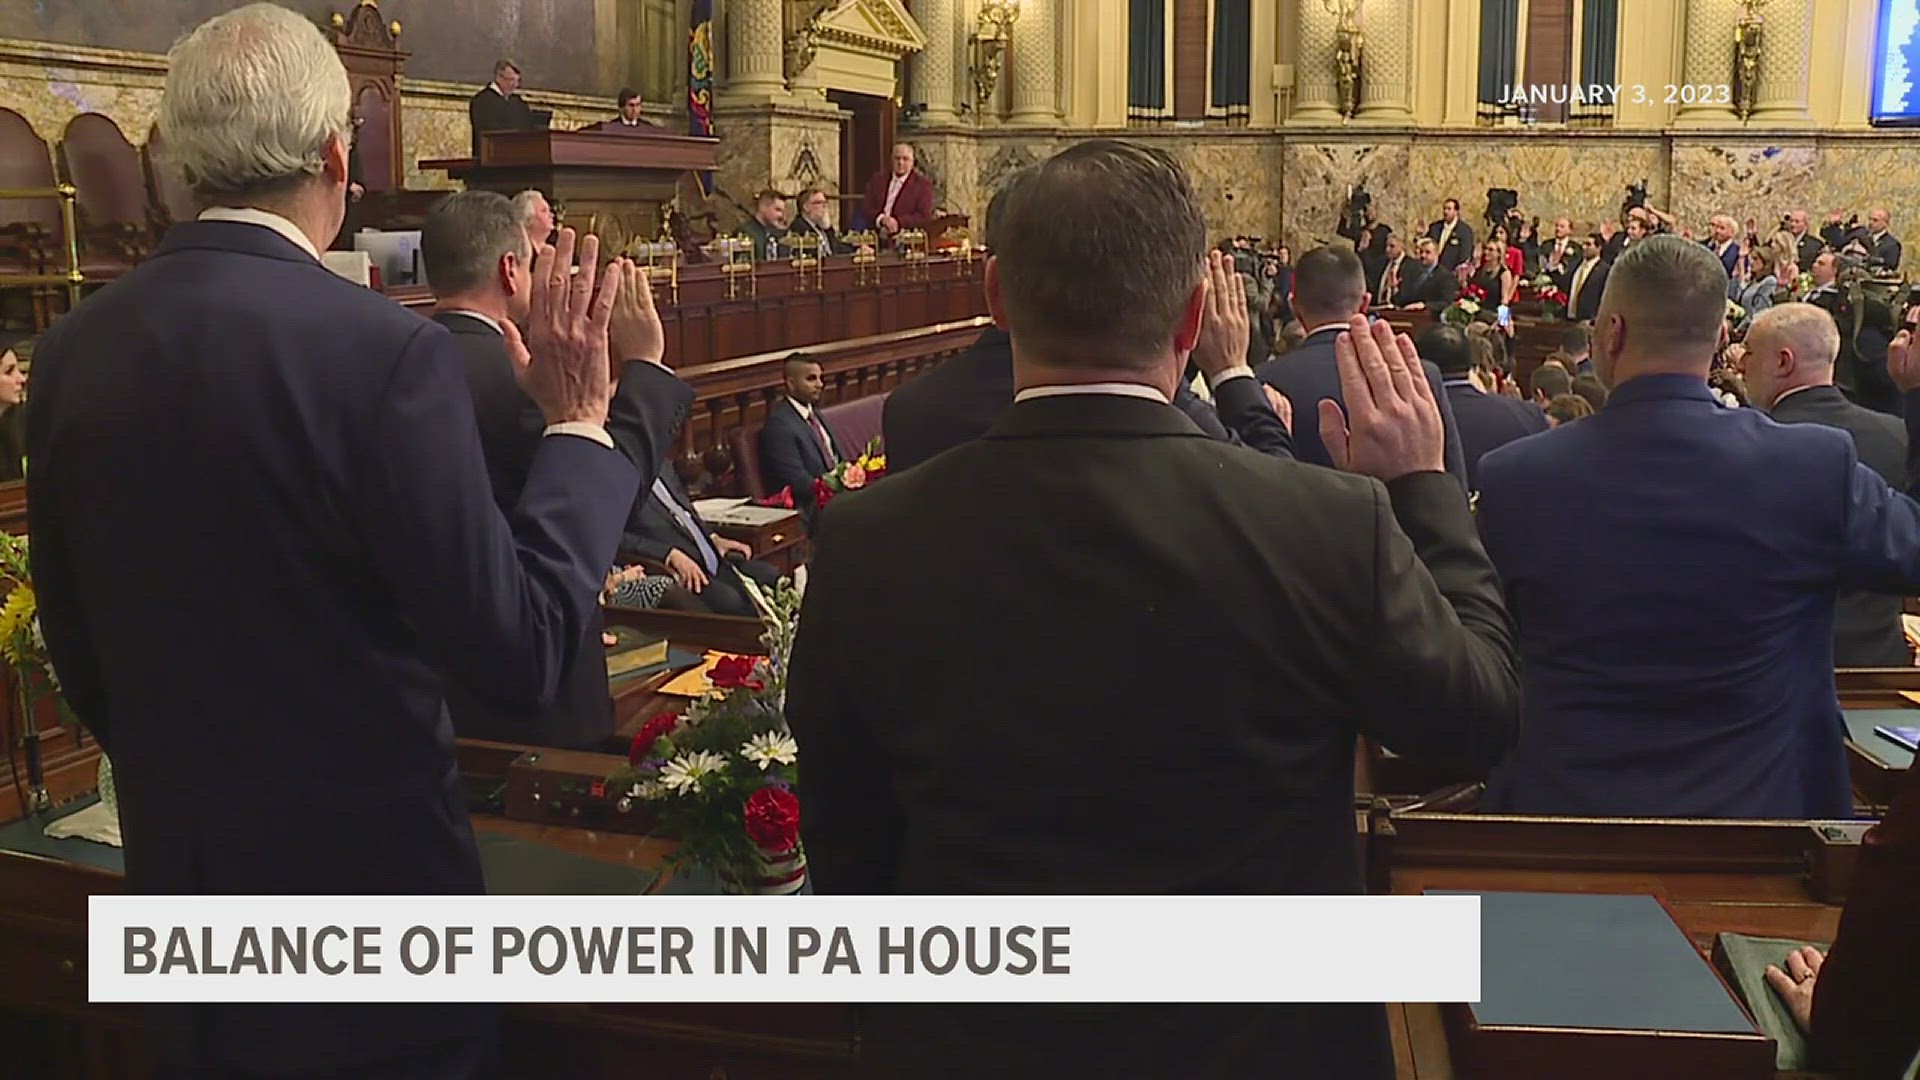 After Representative Mike Zabel's departure from the Pa. House, it is unclear whether or not the Republicans will be able to take the majority.